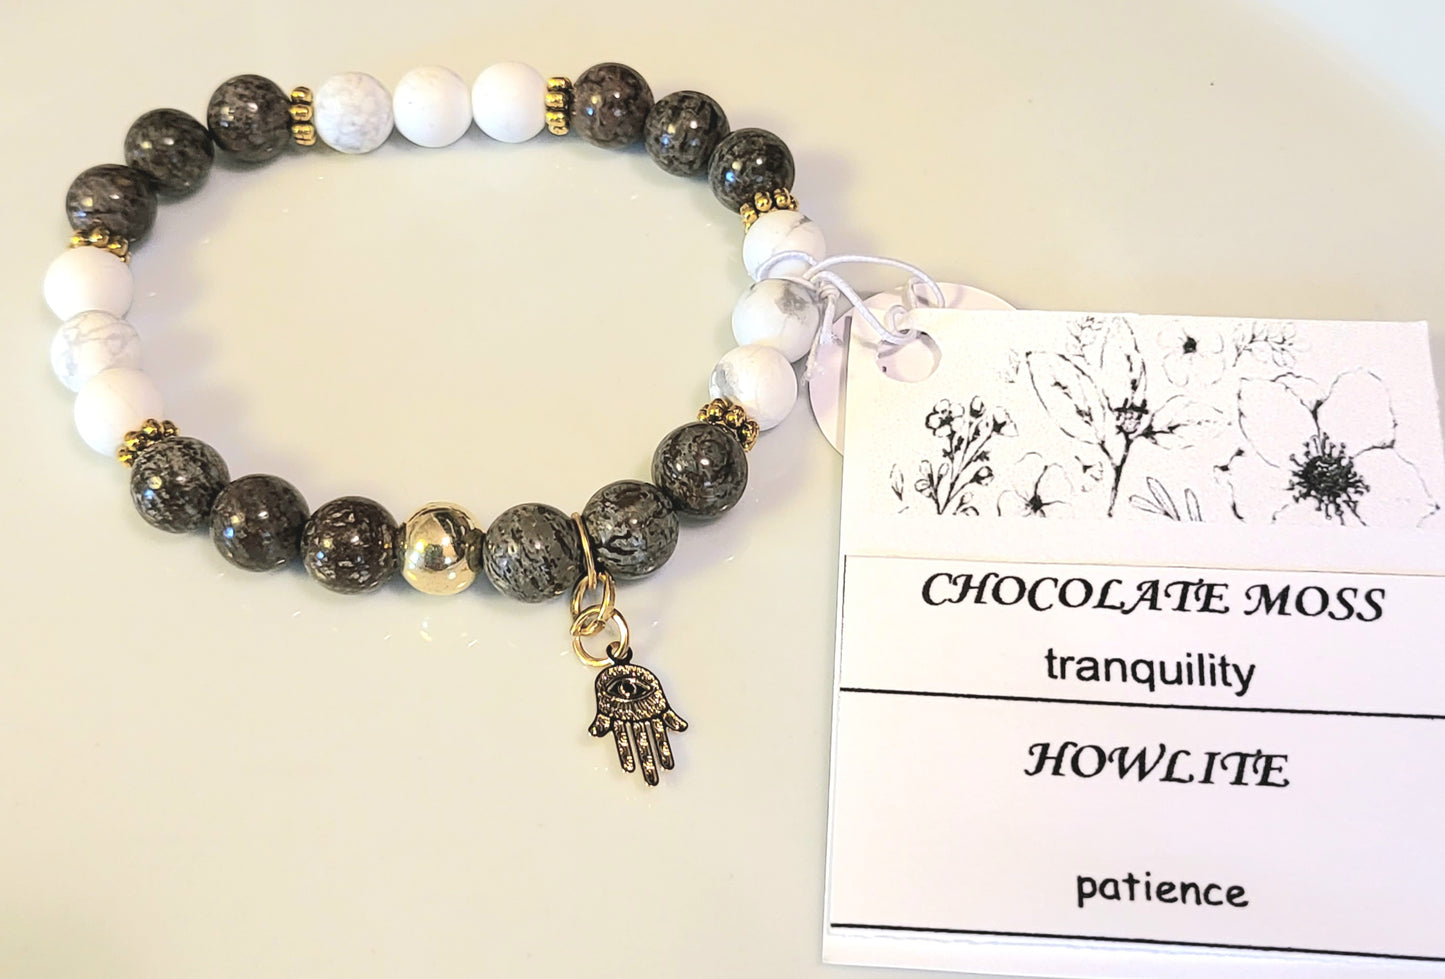 Chocolate Moss & Howlite Bracelet tranquility and patience